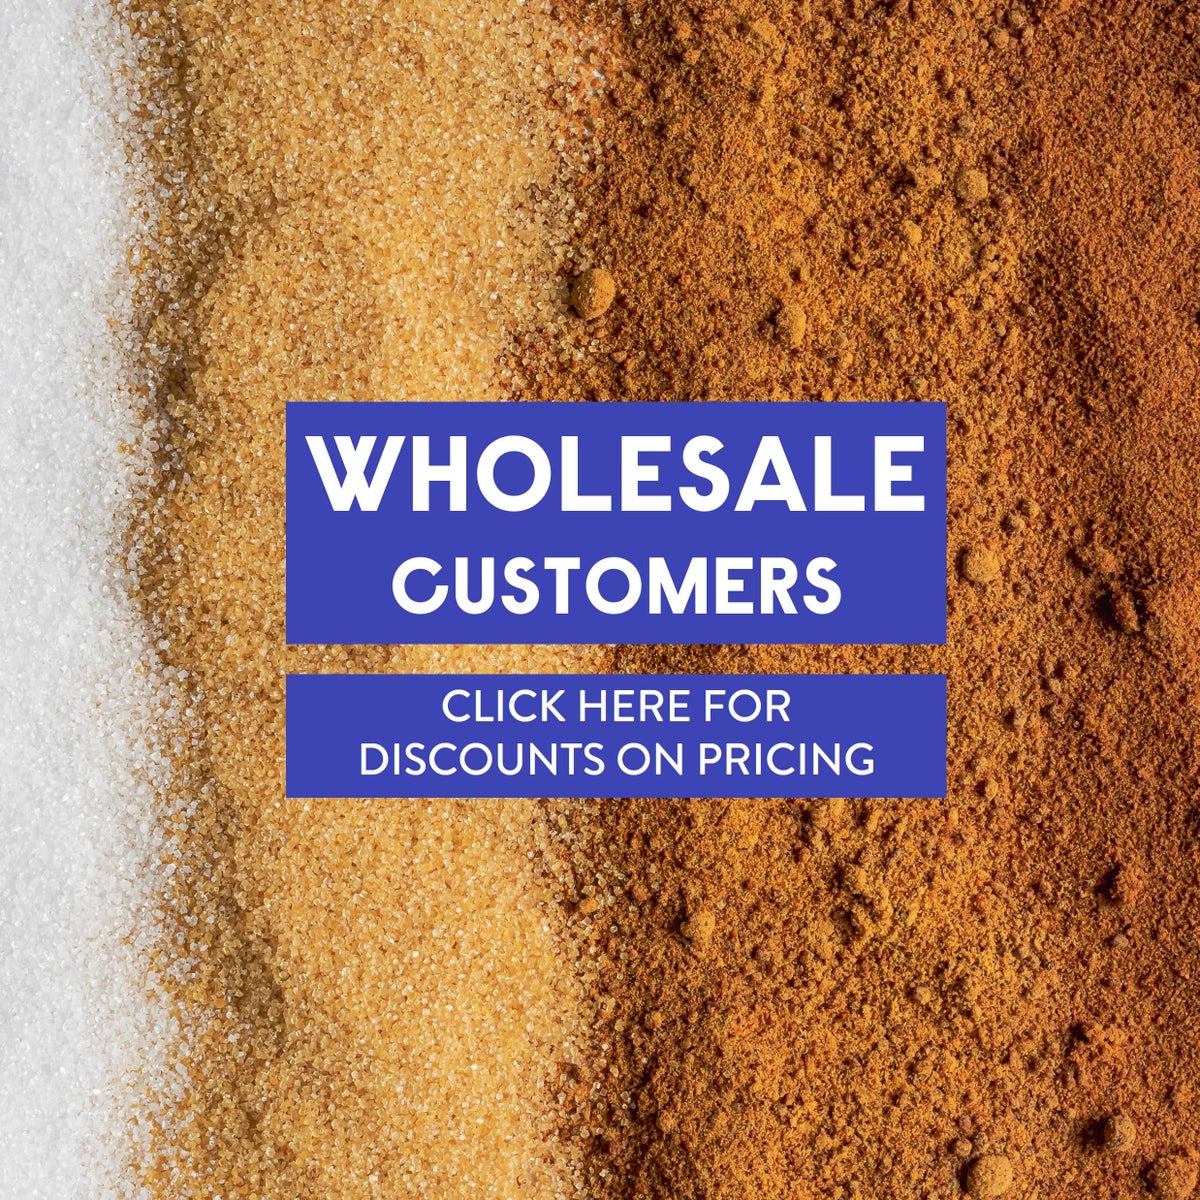 Wholesale customers. Click here for discount pricing.